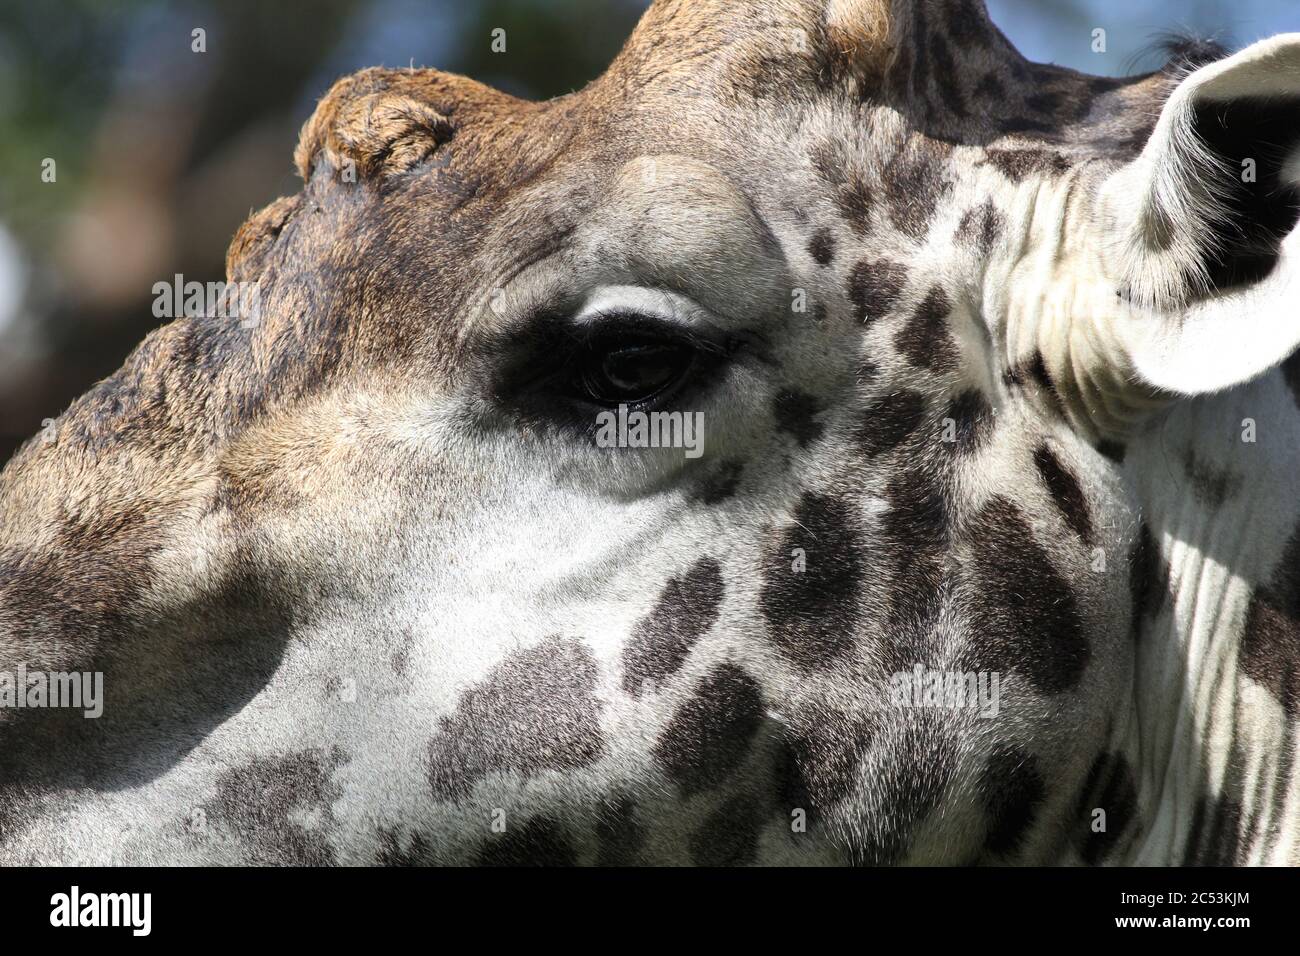 Close up of the face of a Masai giraffe with a typical coat pattern Stock Photo